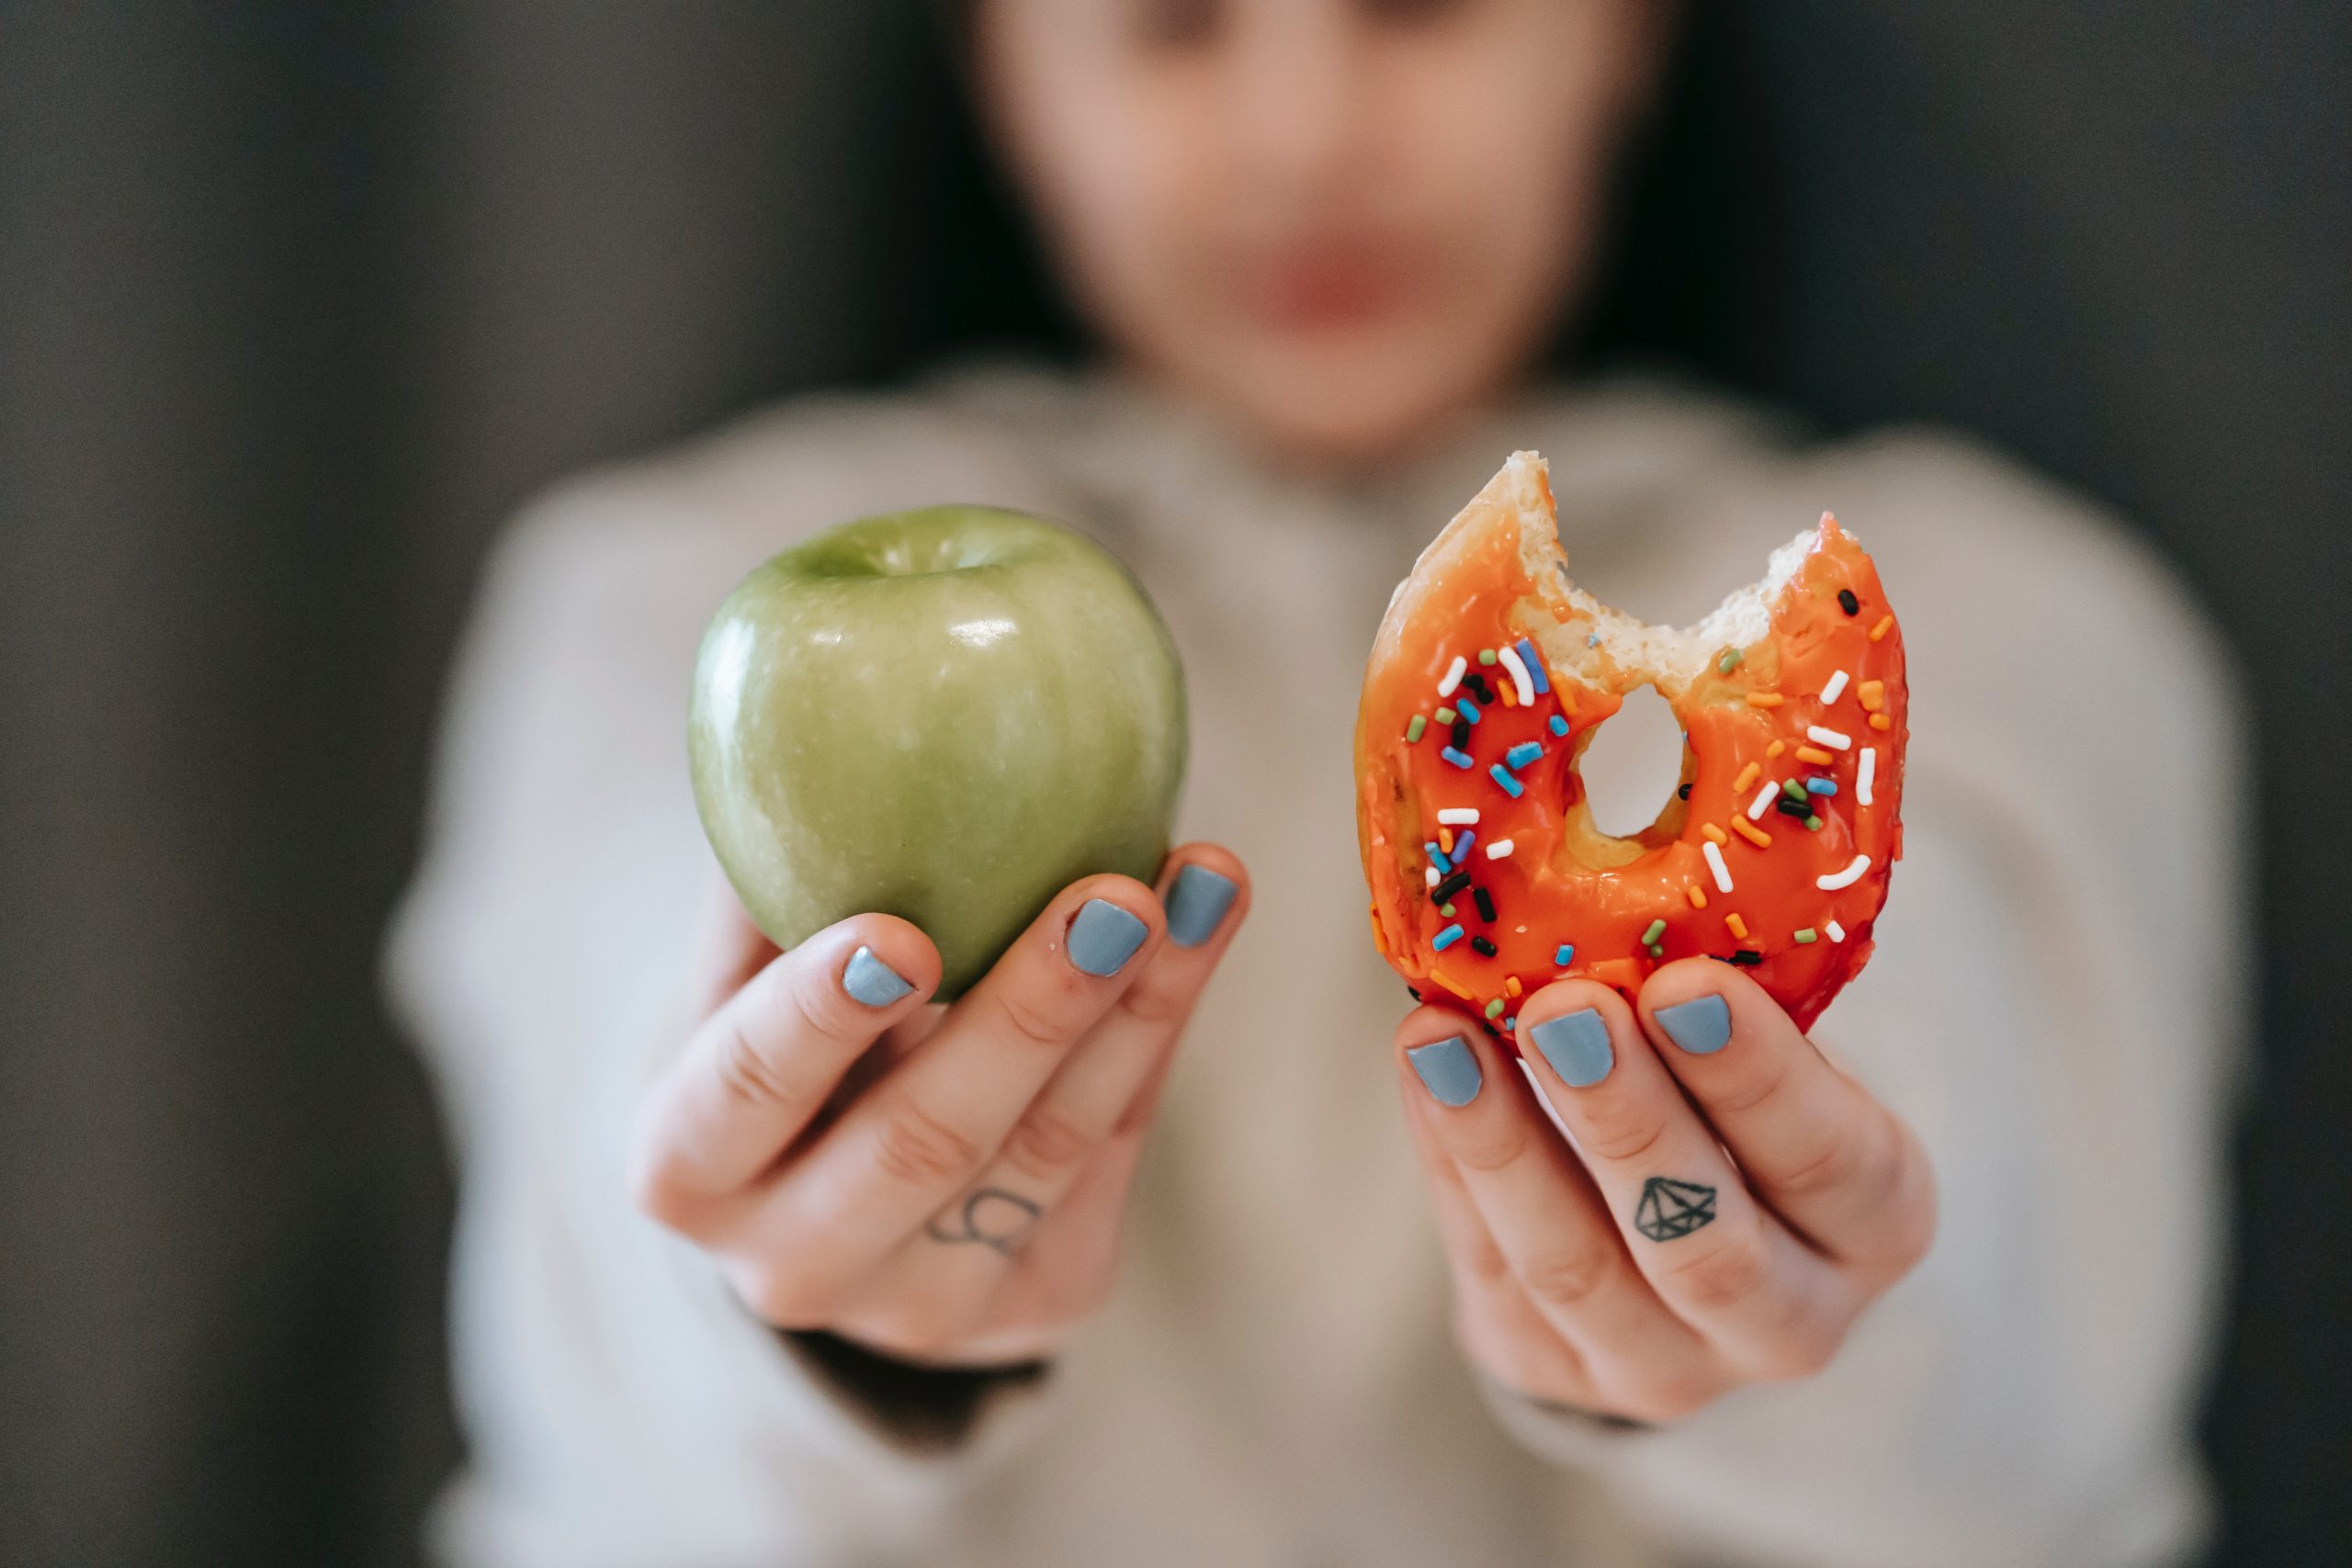 Woman holding a bitten donut in one hand and an apple in the other.